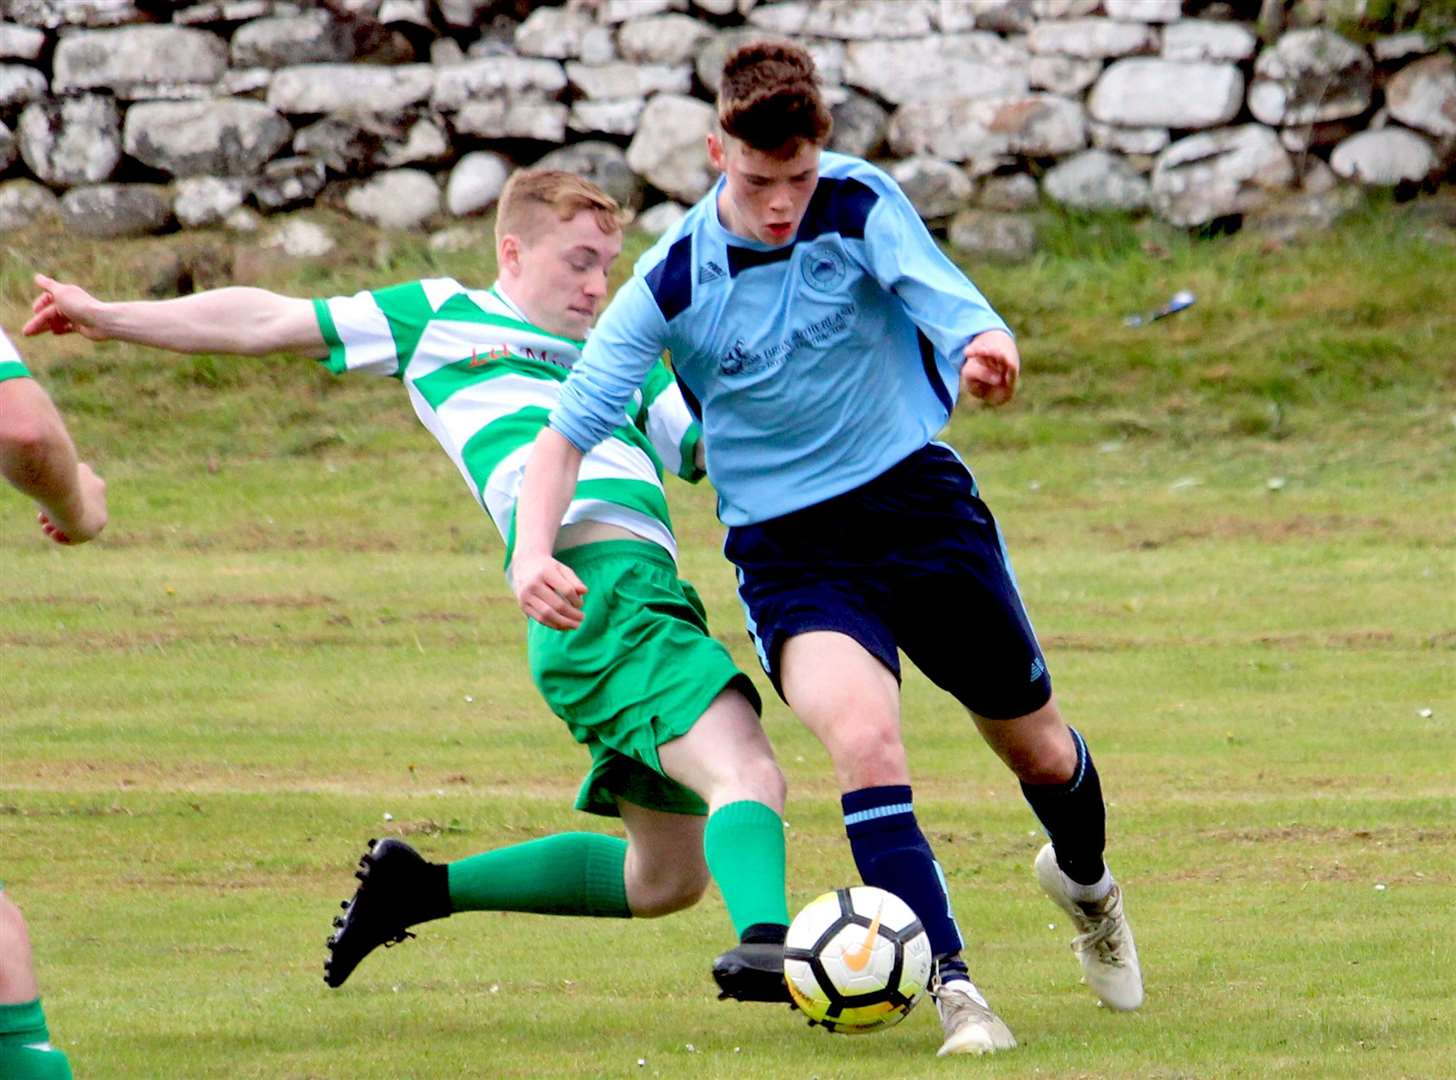 Helmsdale United and Golspie Stafford are among the eight teams returning to amateur action in Ross and Sutherland this summer.